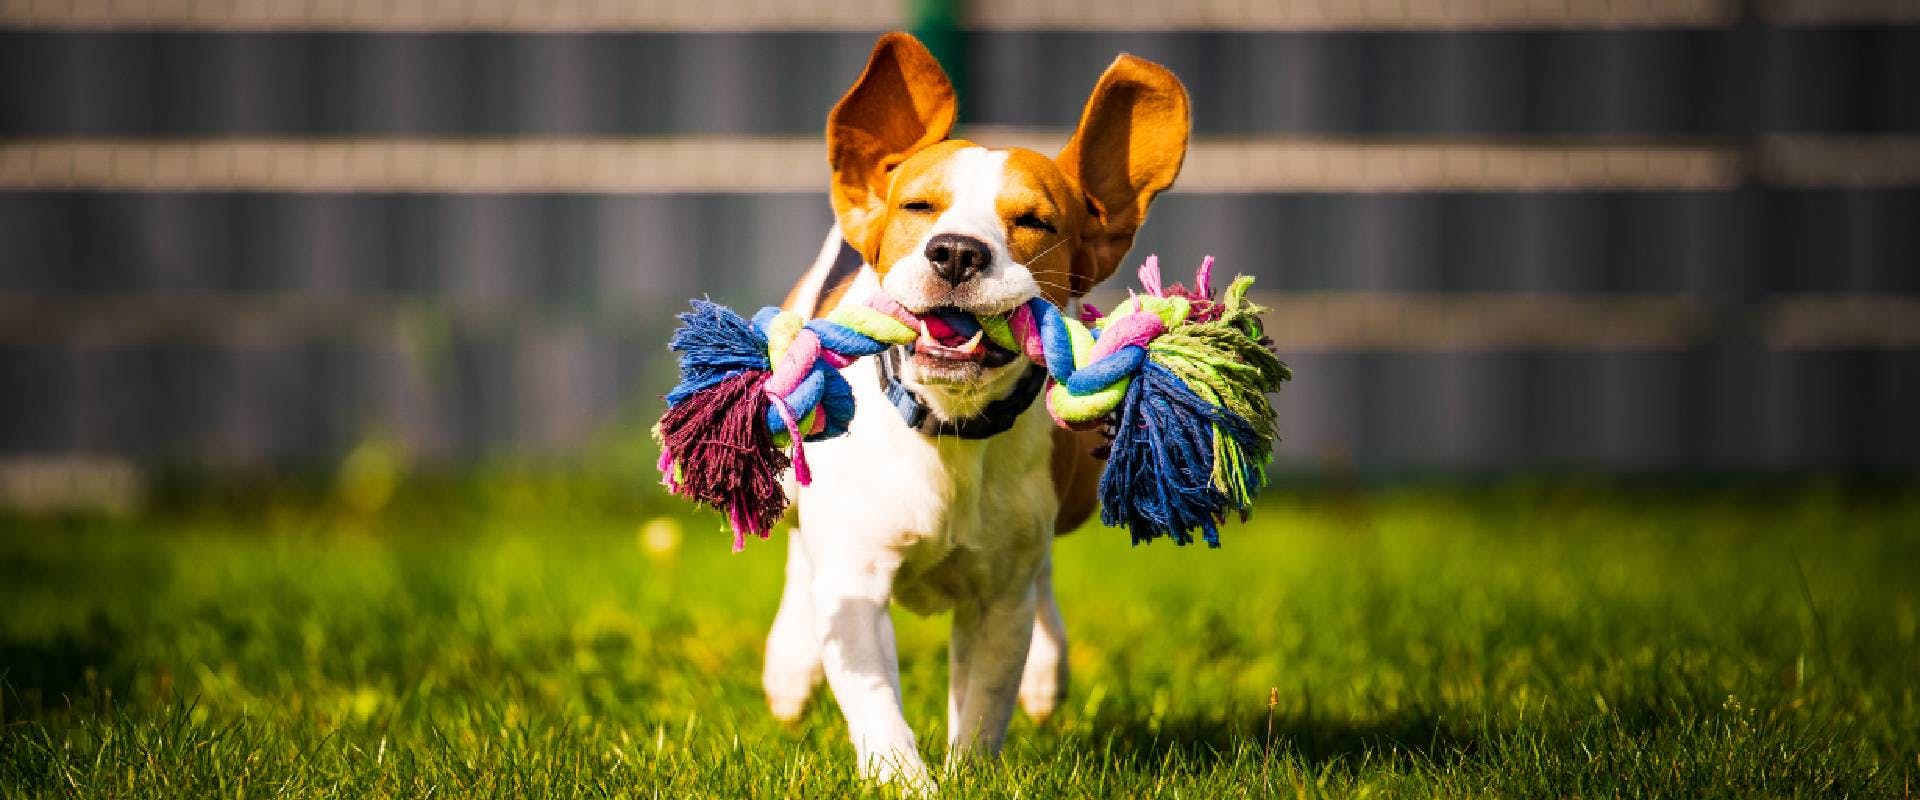 Beagle dog with a toy